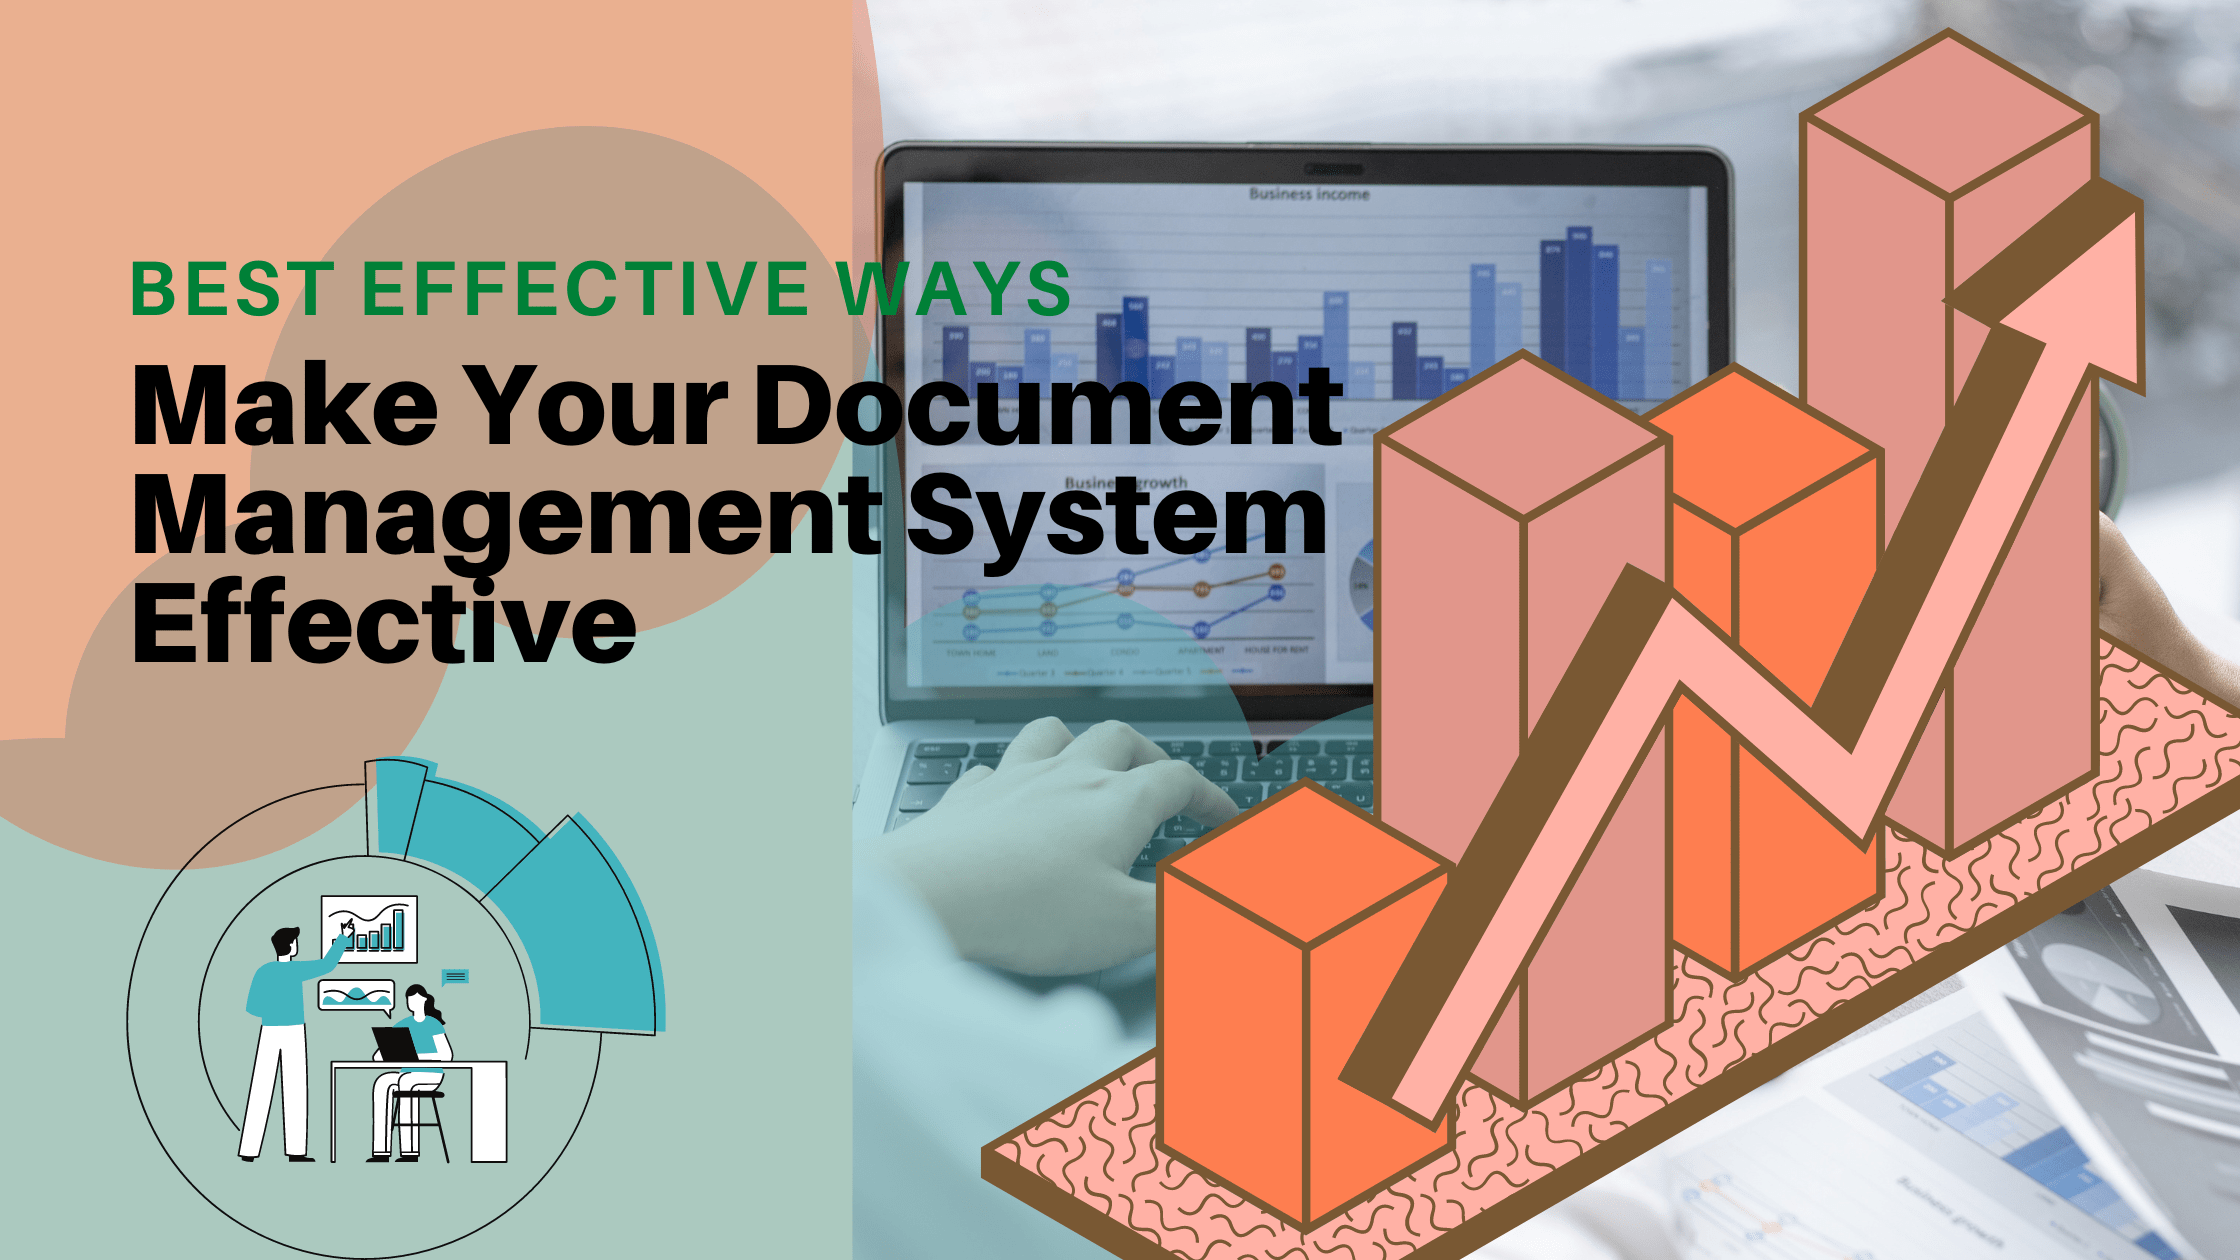 Best Effective Ways to Make Your Document Management System Effective